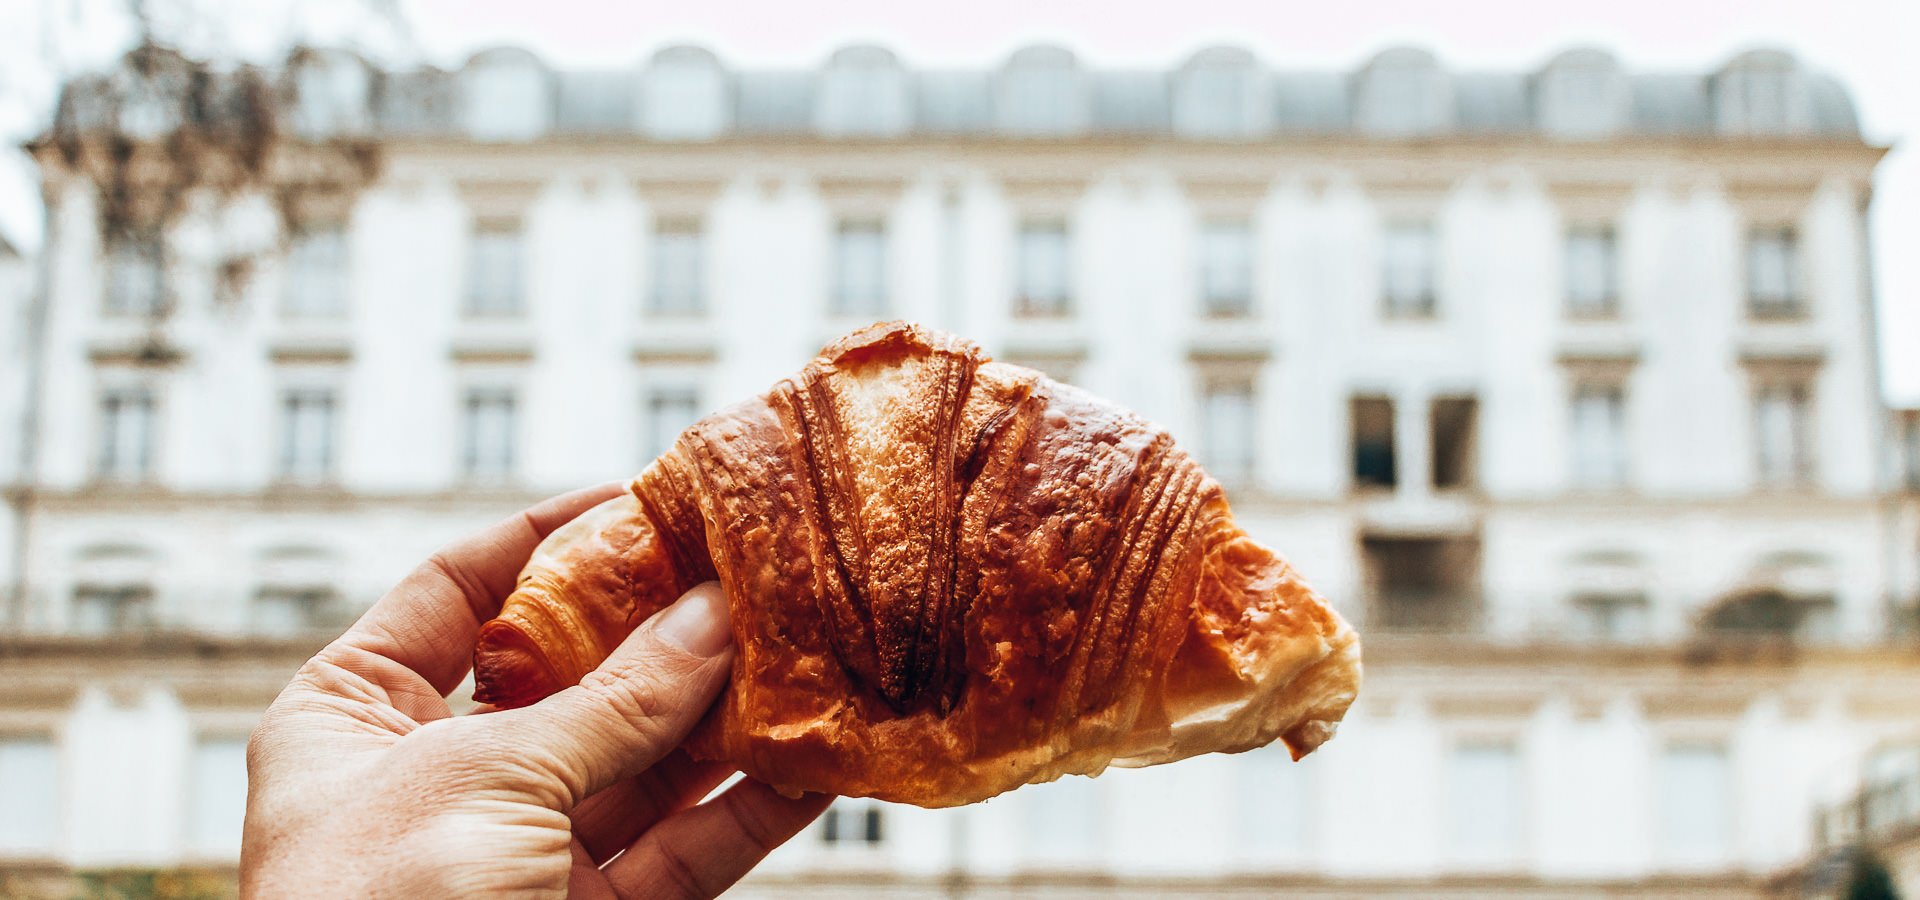 8 Of The Best Bakeries and Pâtisseries In Paris | best bakeries and pâtisseries in paris 8